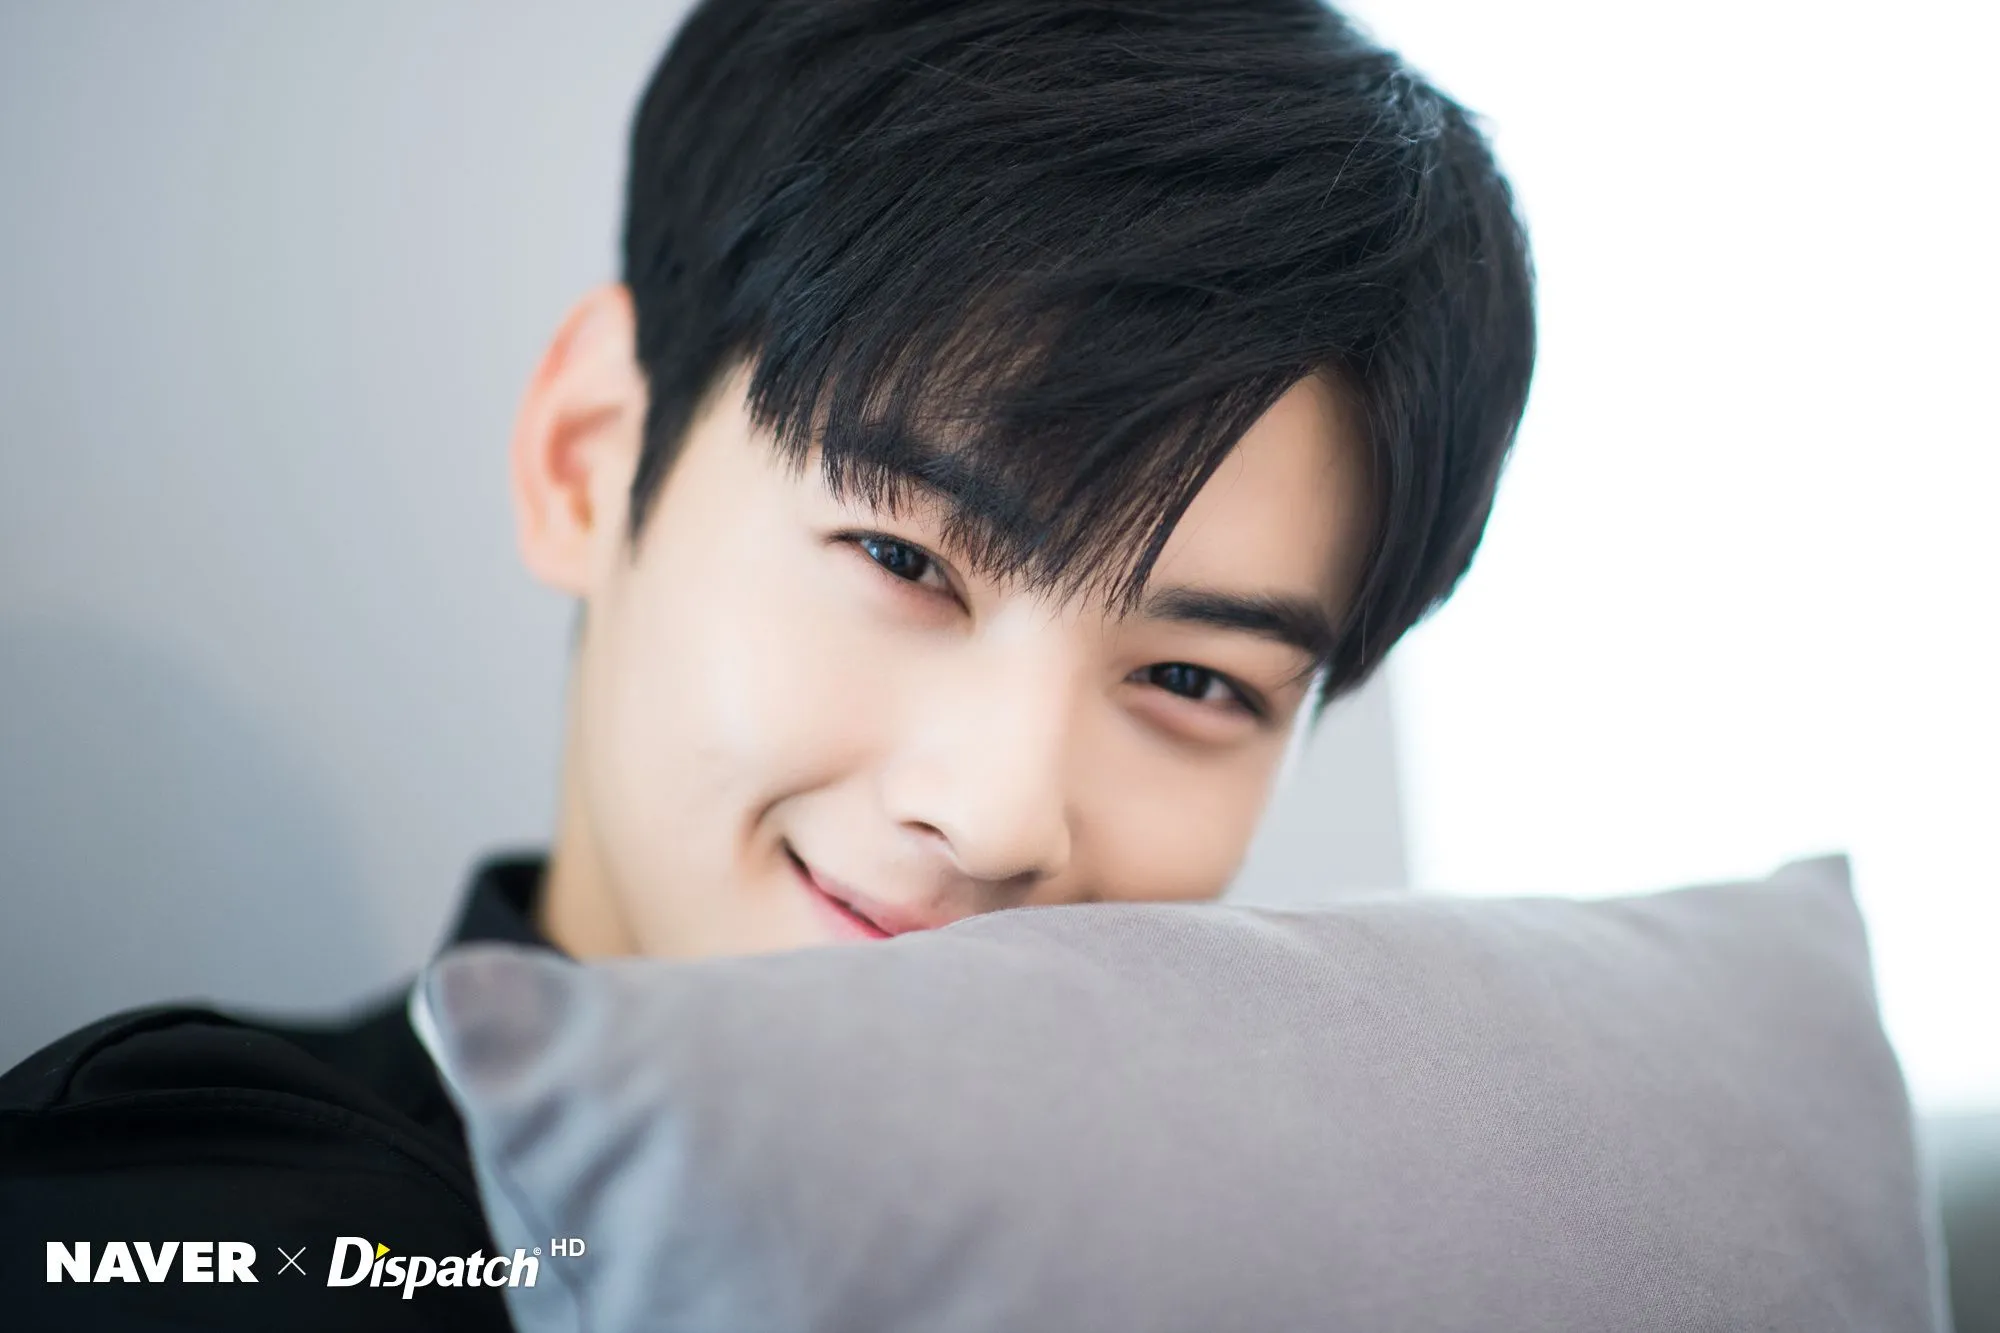 ASTRO's Cha Eun Woo In Talks For New Drama By “Melo Is My Nature” Director